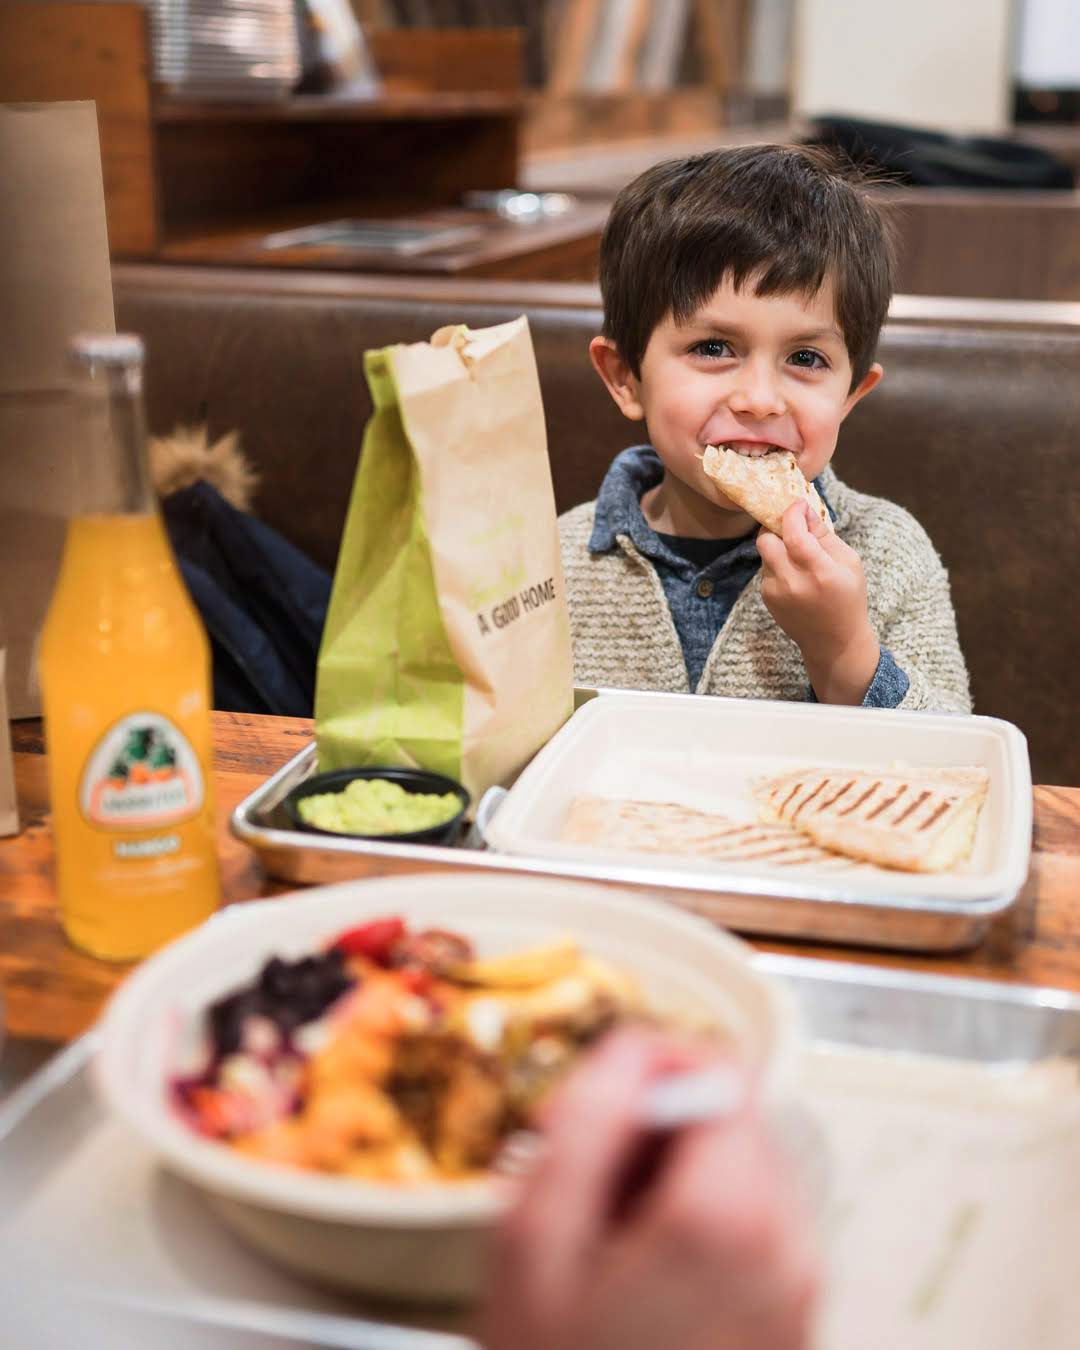 child enjoys meal from mucho burrito franchise